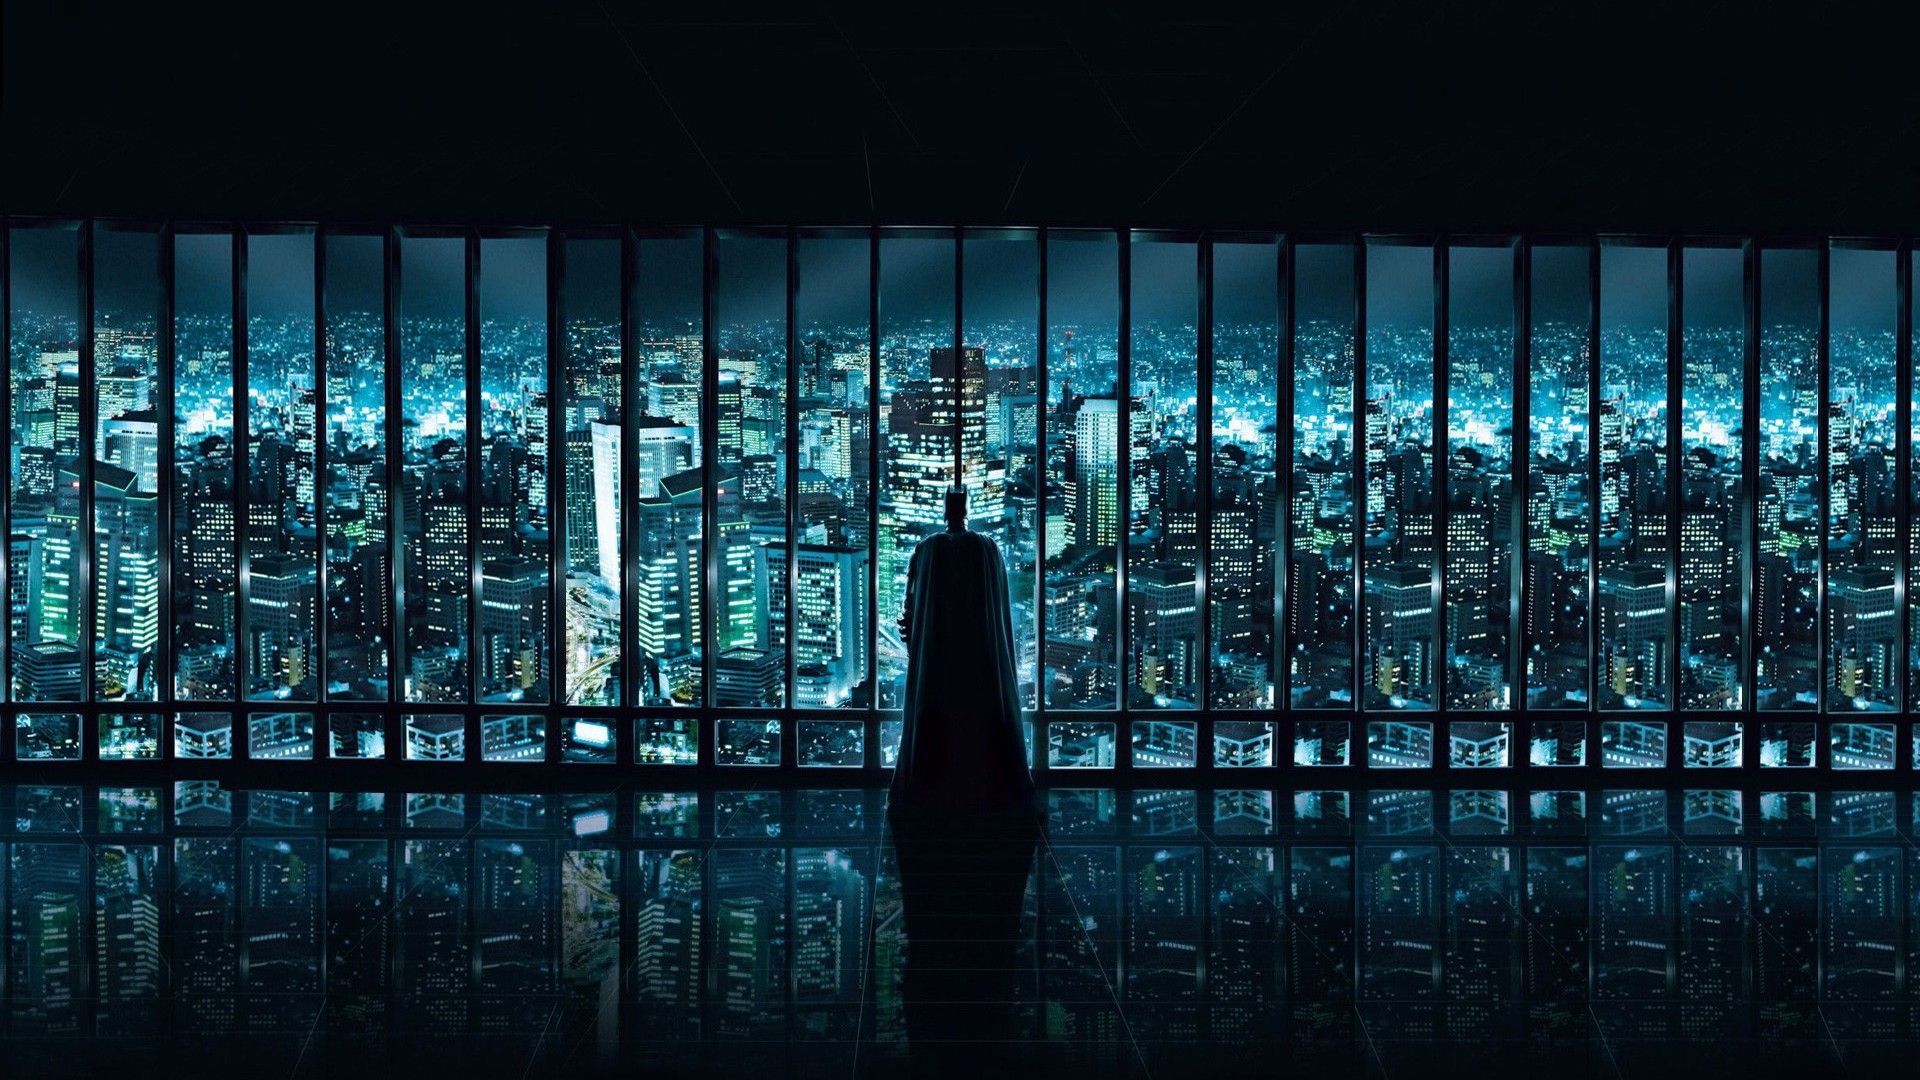 The Dark Knight wallpapers